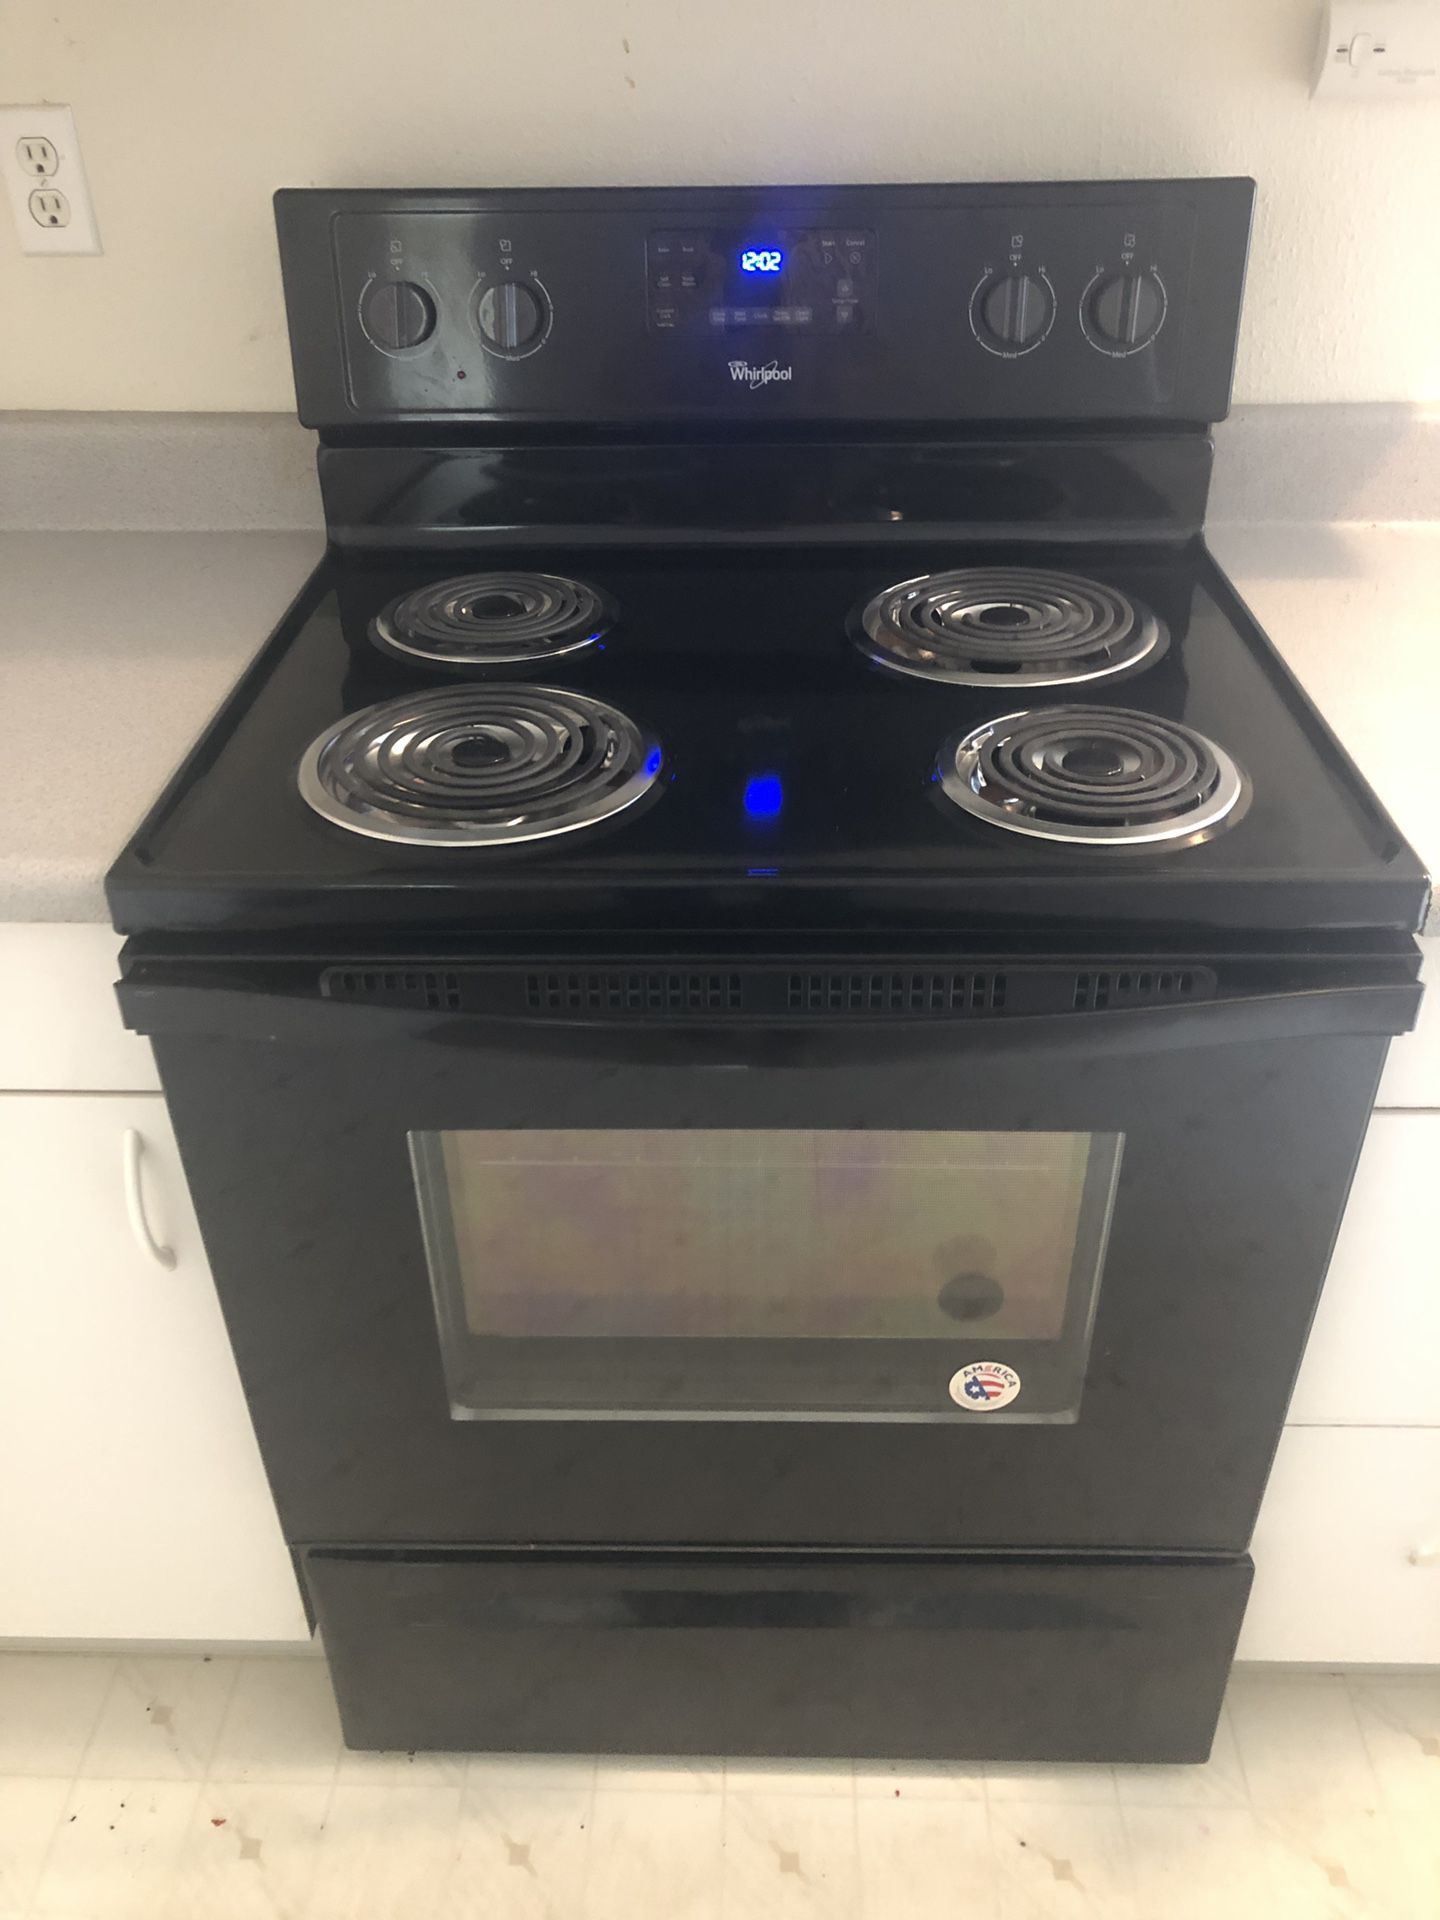 Whirlpool electric range . 8 months old . Excellent condition.self cleaning